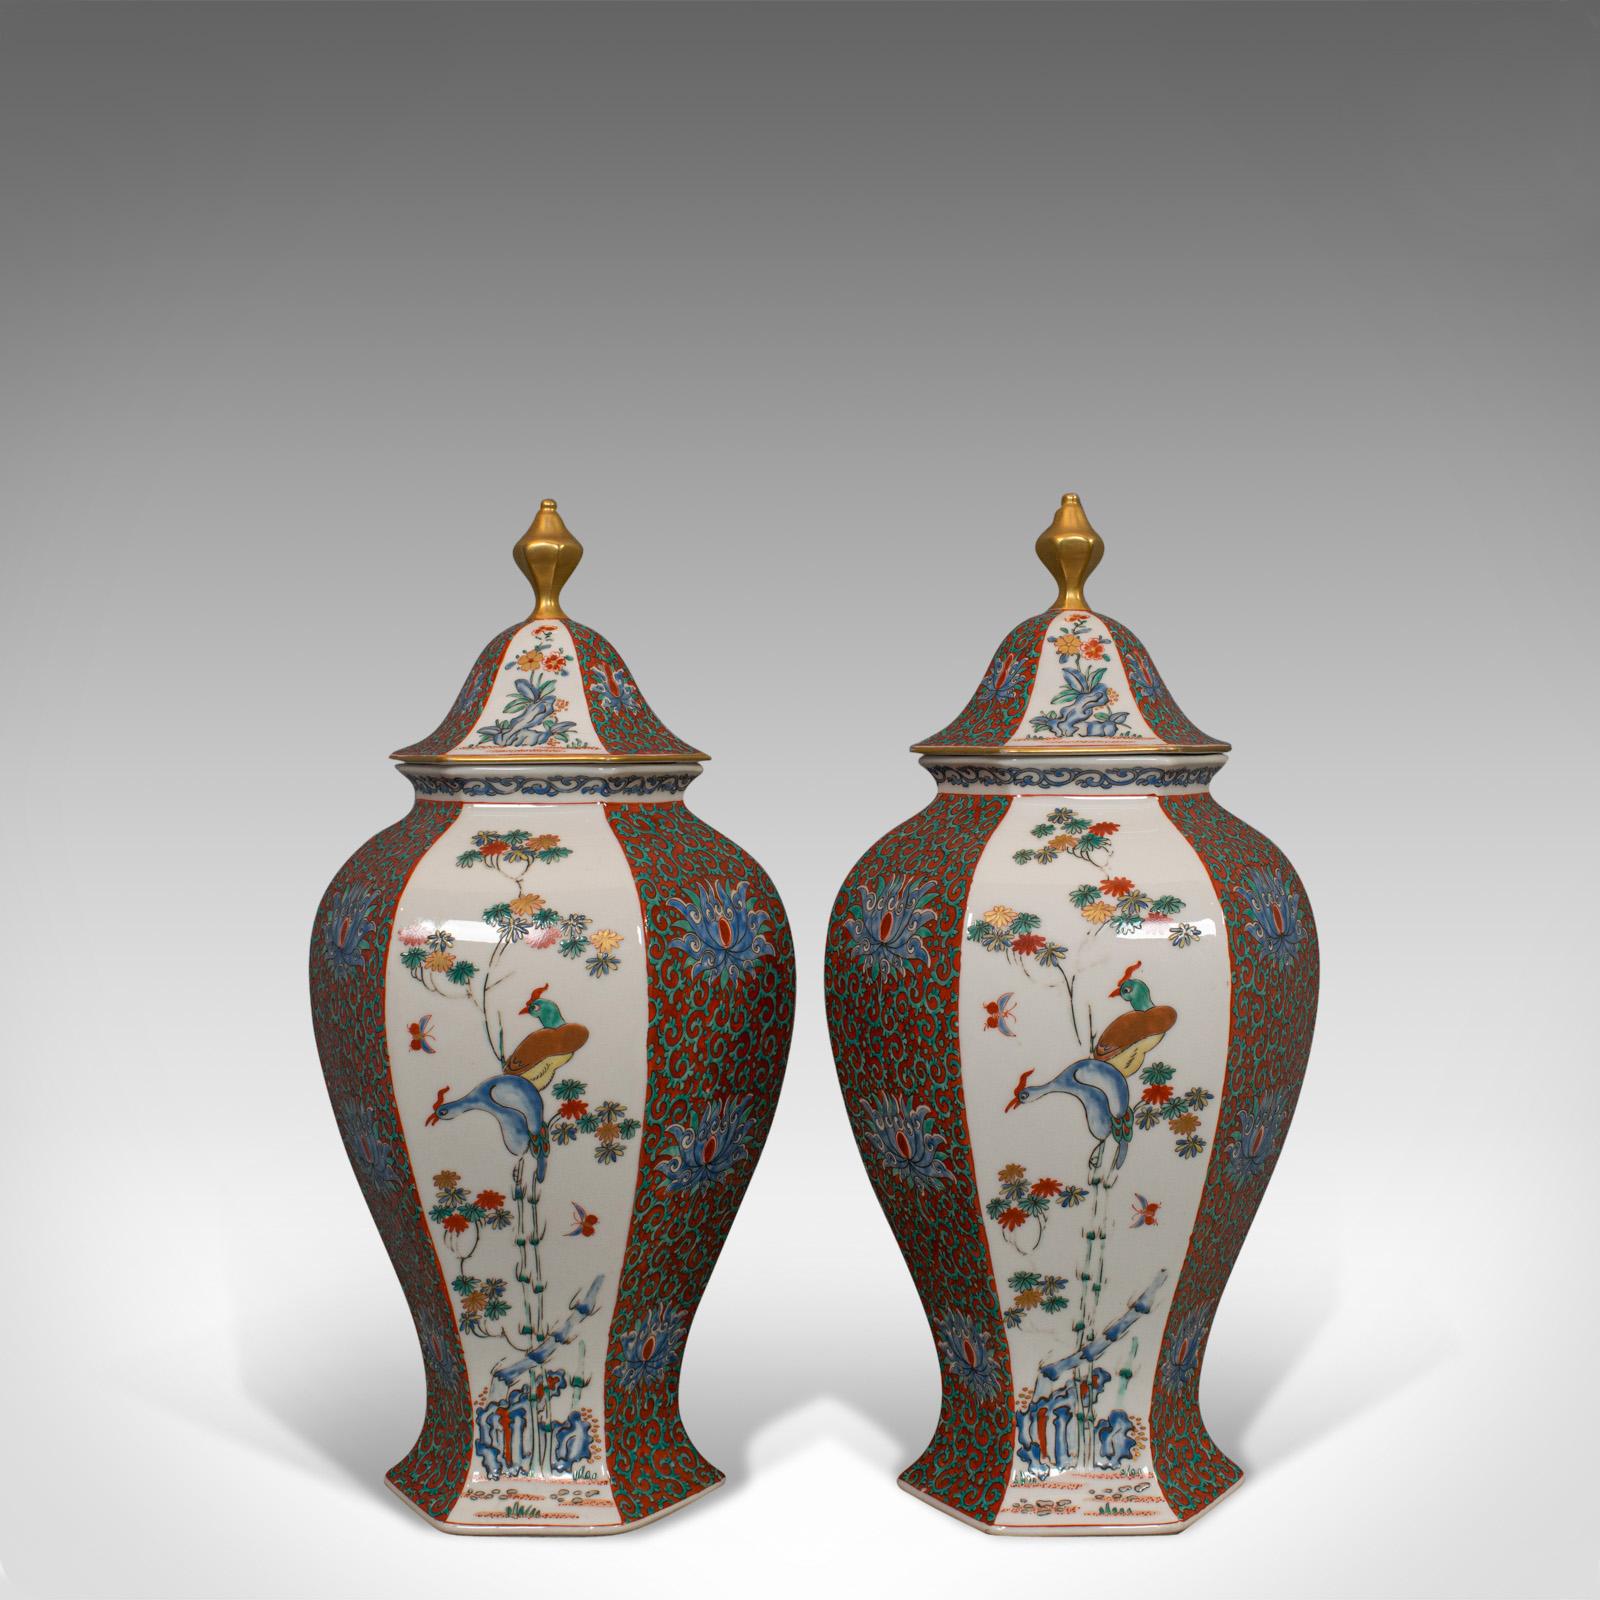 This is a pair of vintage hexagonal spice jars. Two Oriental, ceramic baluster urns with decorative avian and foliate scenes, dating to the mid-20th century, circa 1950.

Hexagonal form with profuse decoration
Displaying a desirable aged